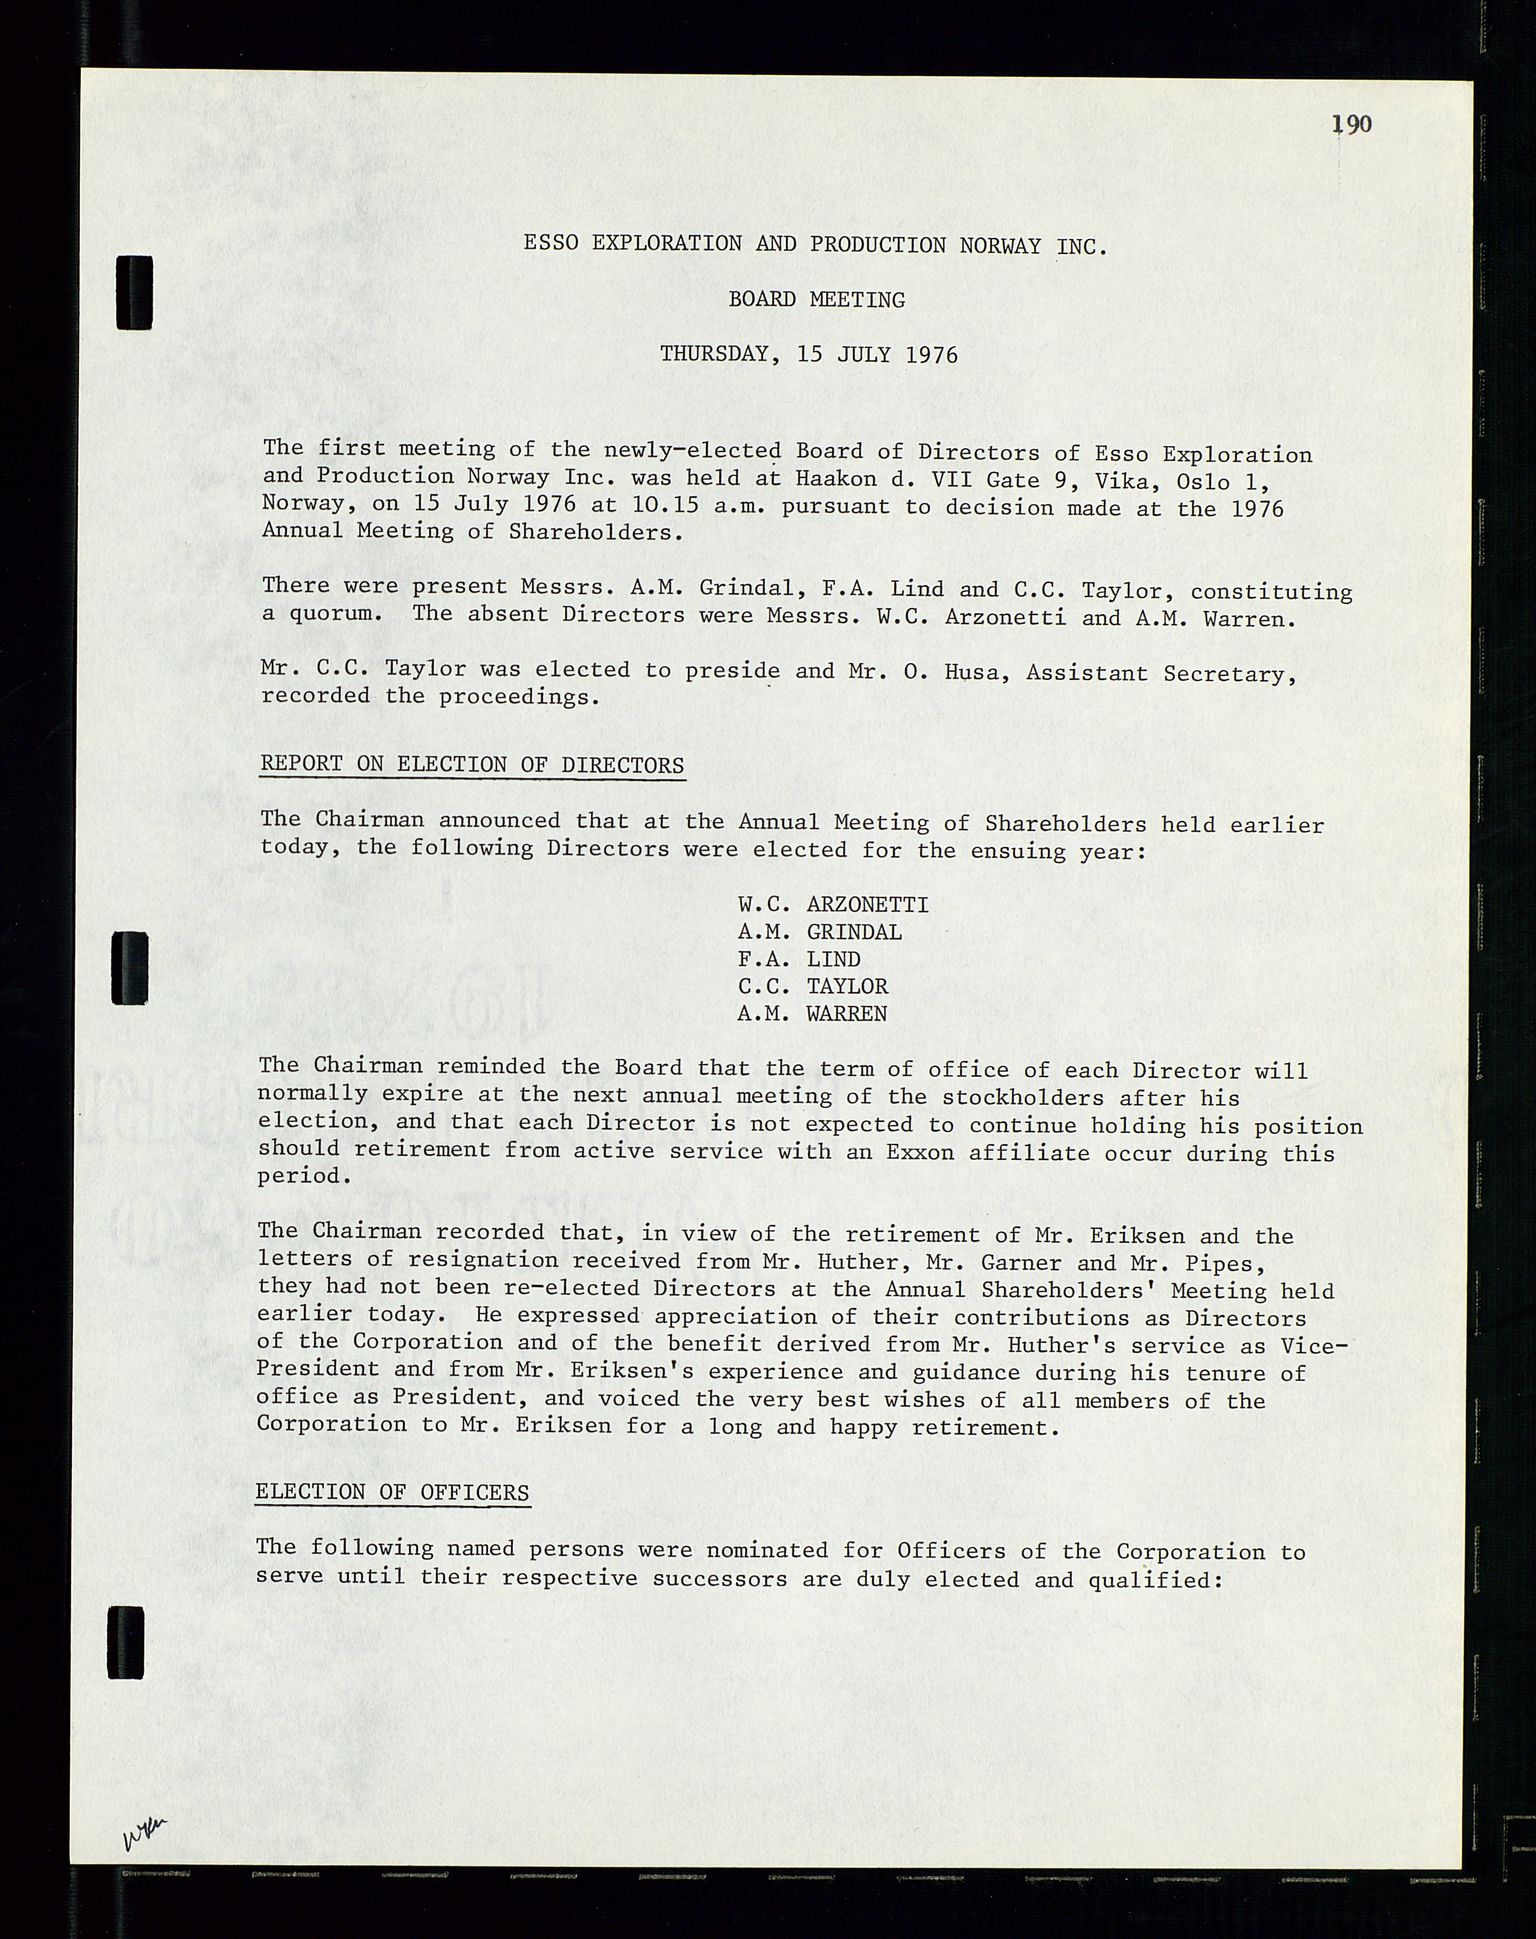 Pa 1512 - Esso Exploration and Production Norway Inc., SAST/A-101917/A/Aa/L0001/0002: Styredokumenter / Corporate records, Board meeting minutes, Agreements, Stocholder meetings, 1975-1979, s. 40